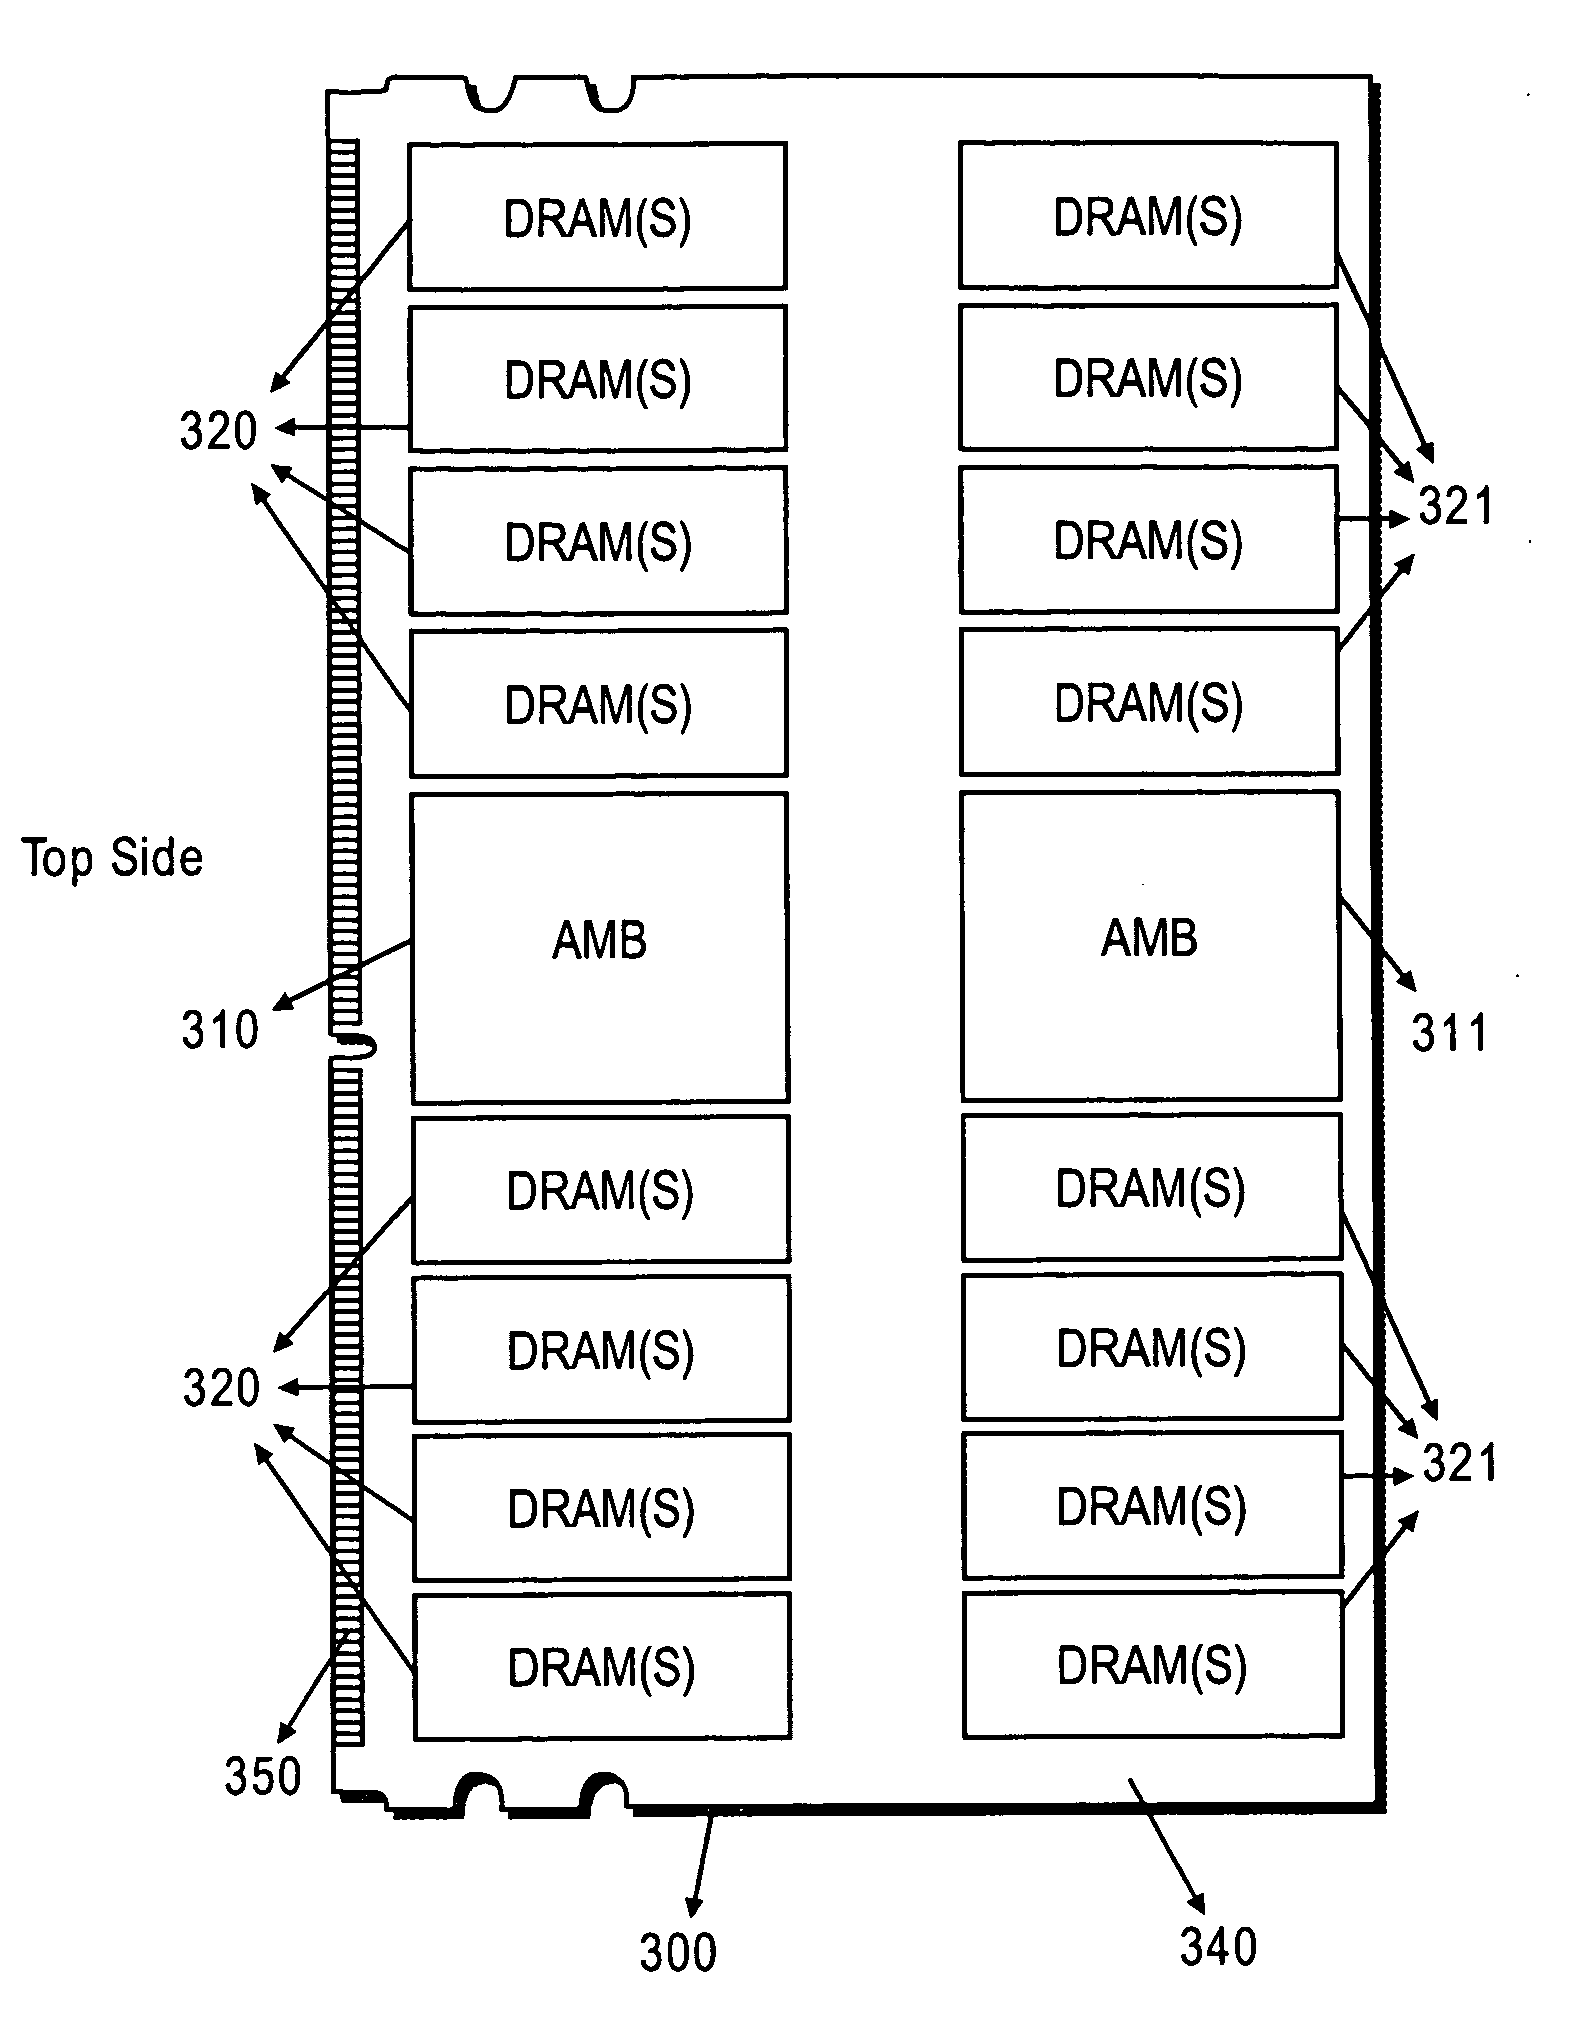 Memory supermodule utilizing point to point serial data links